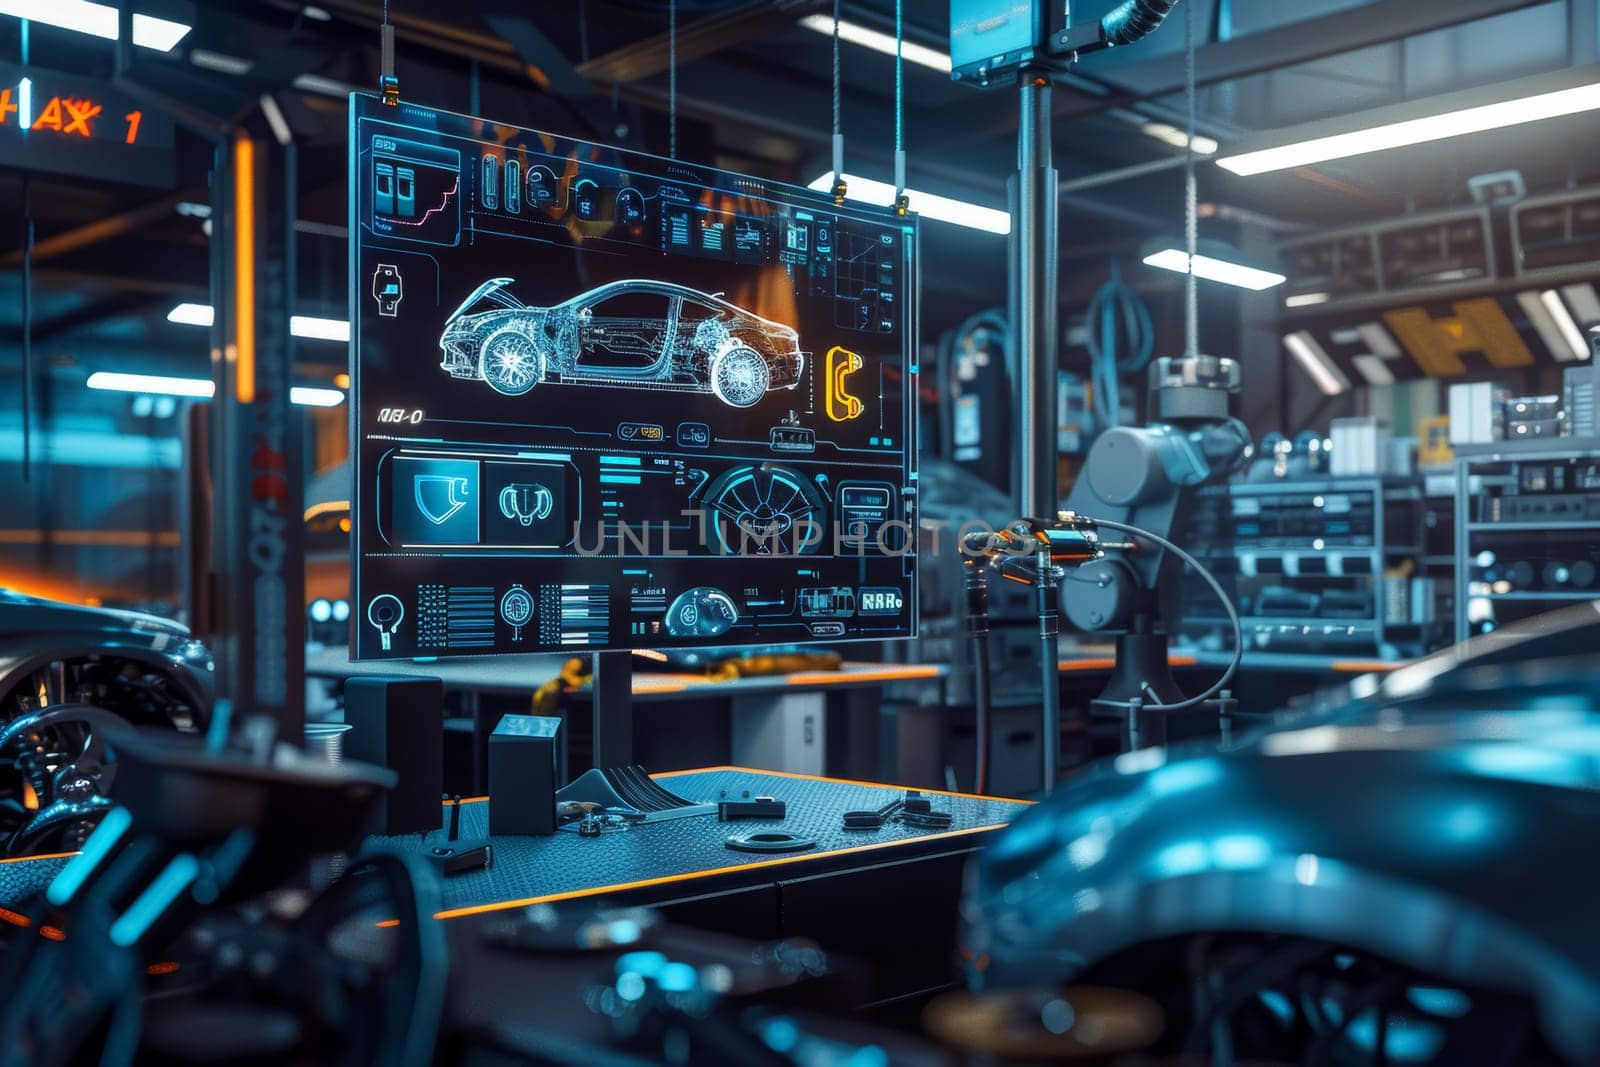 A technician operates advanced diagnostic equipment in a modern automotive repair shop, with high-performance cars in the background